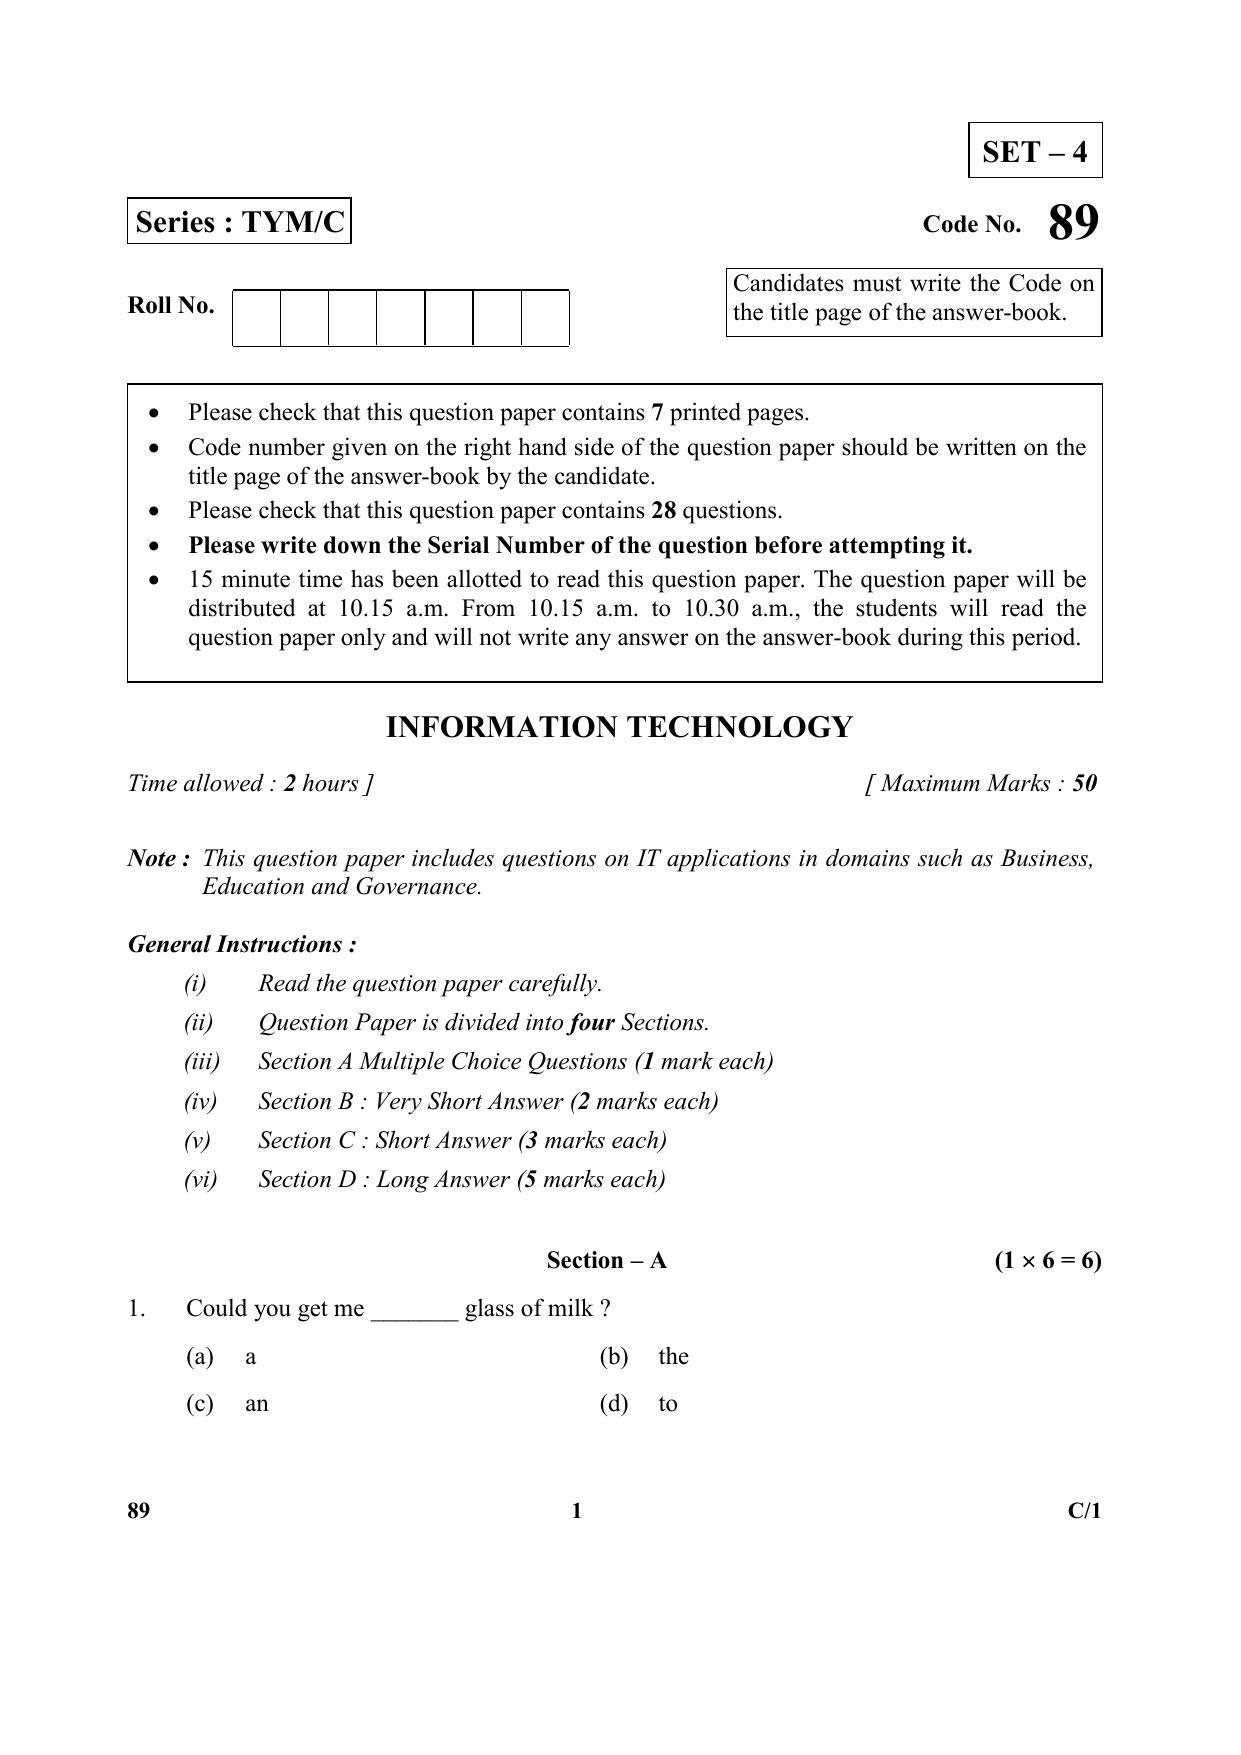 CBSE Class 10 89 (Information Technology) 2018 Compartment Question Paper - Page 1